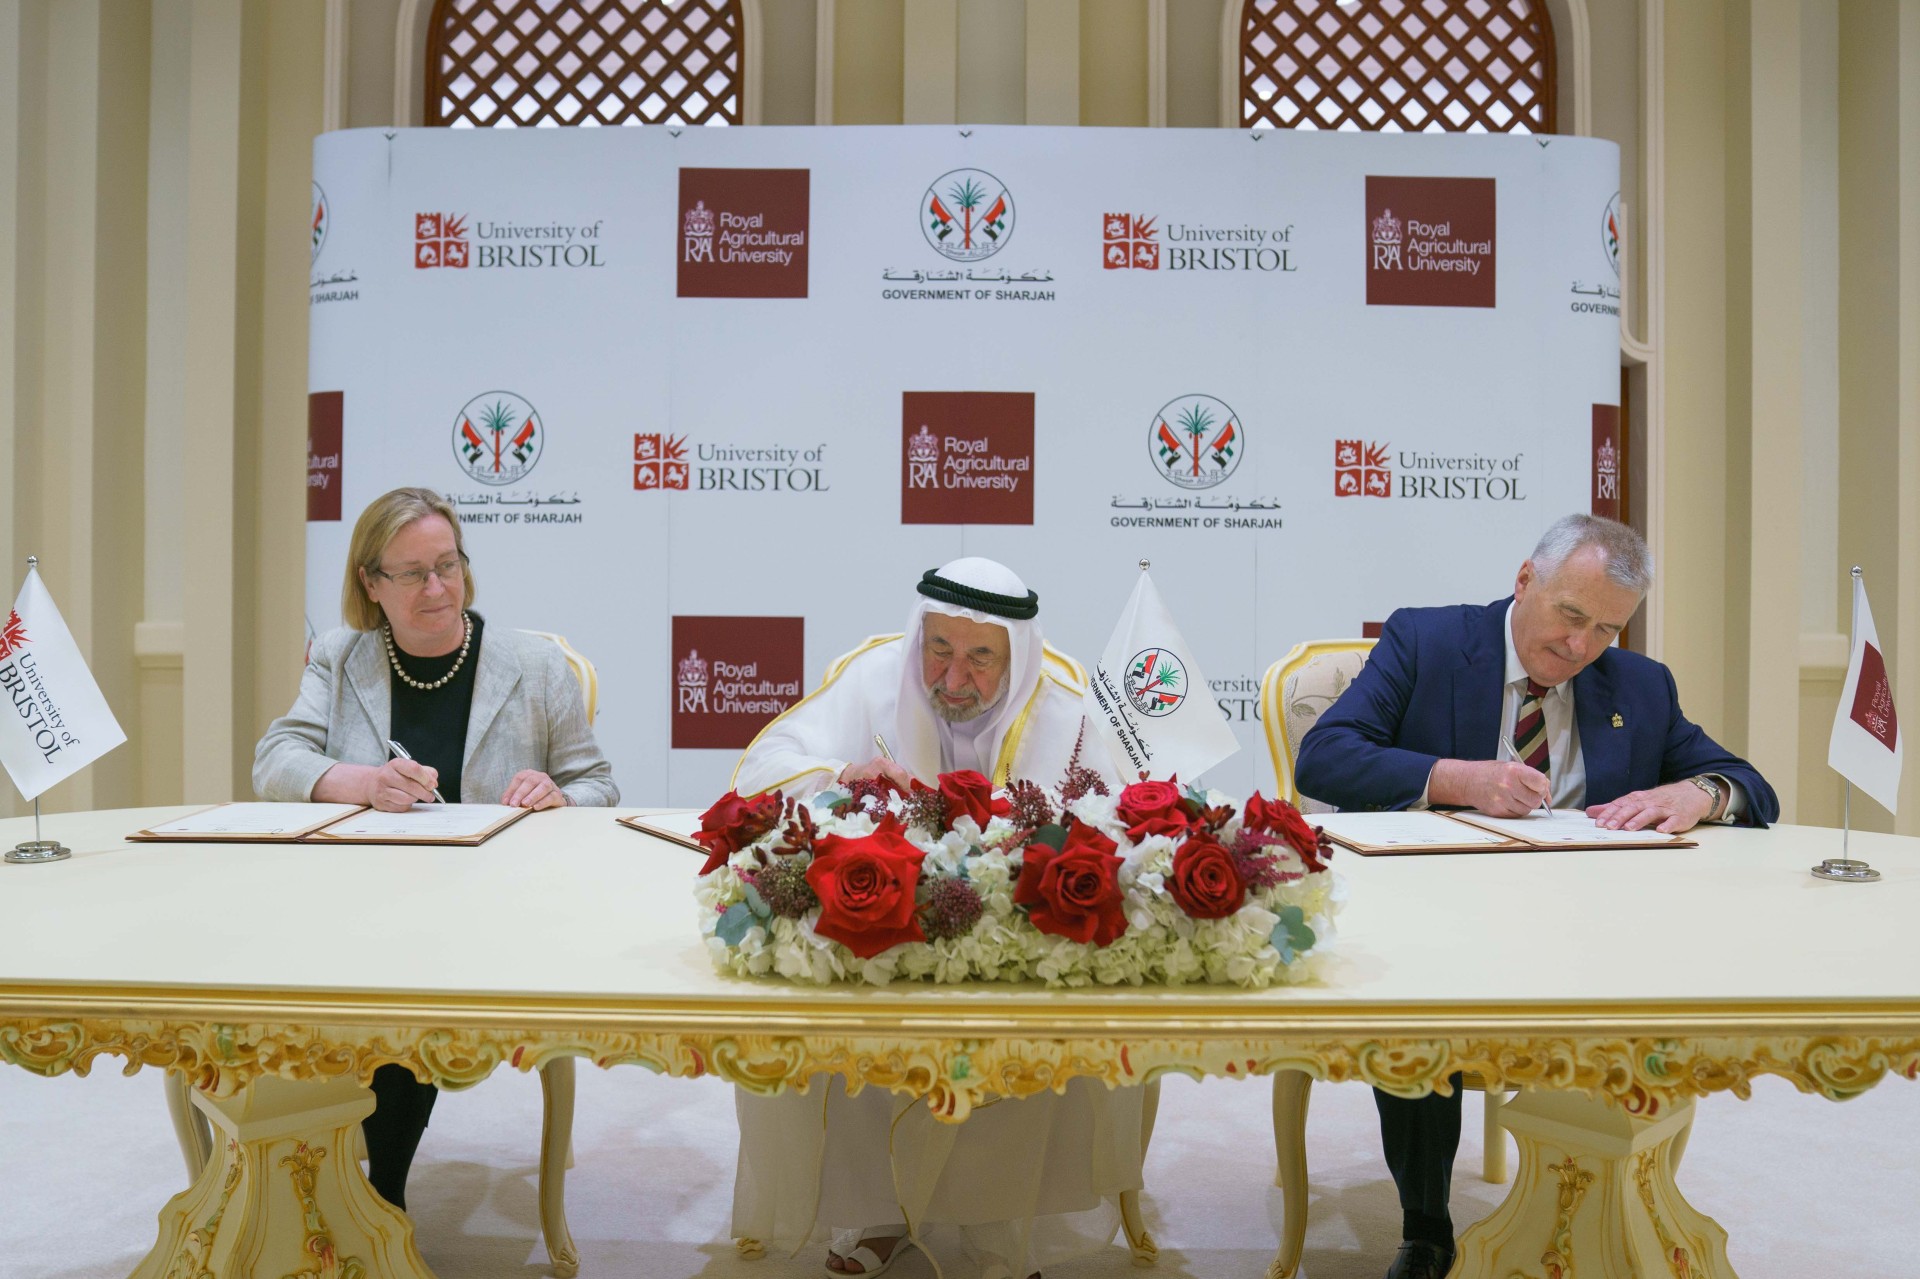 Professor Evelyn Welch (Vice-Chancellor and President of the University of Bristol), His Highness Sheikh Dr Sultan bin Muhammad Al Qasimi and Professor Peter McCaffery (Vice-Chancellor at the Royal Agricultural University) signing the Memorandum of Understanding this week in Sharjah